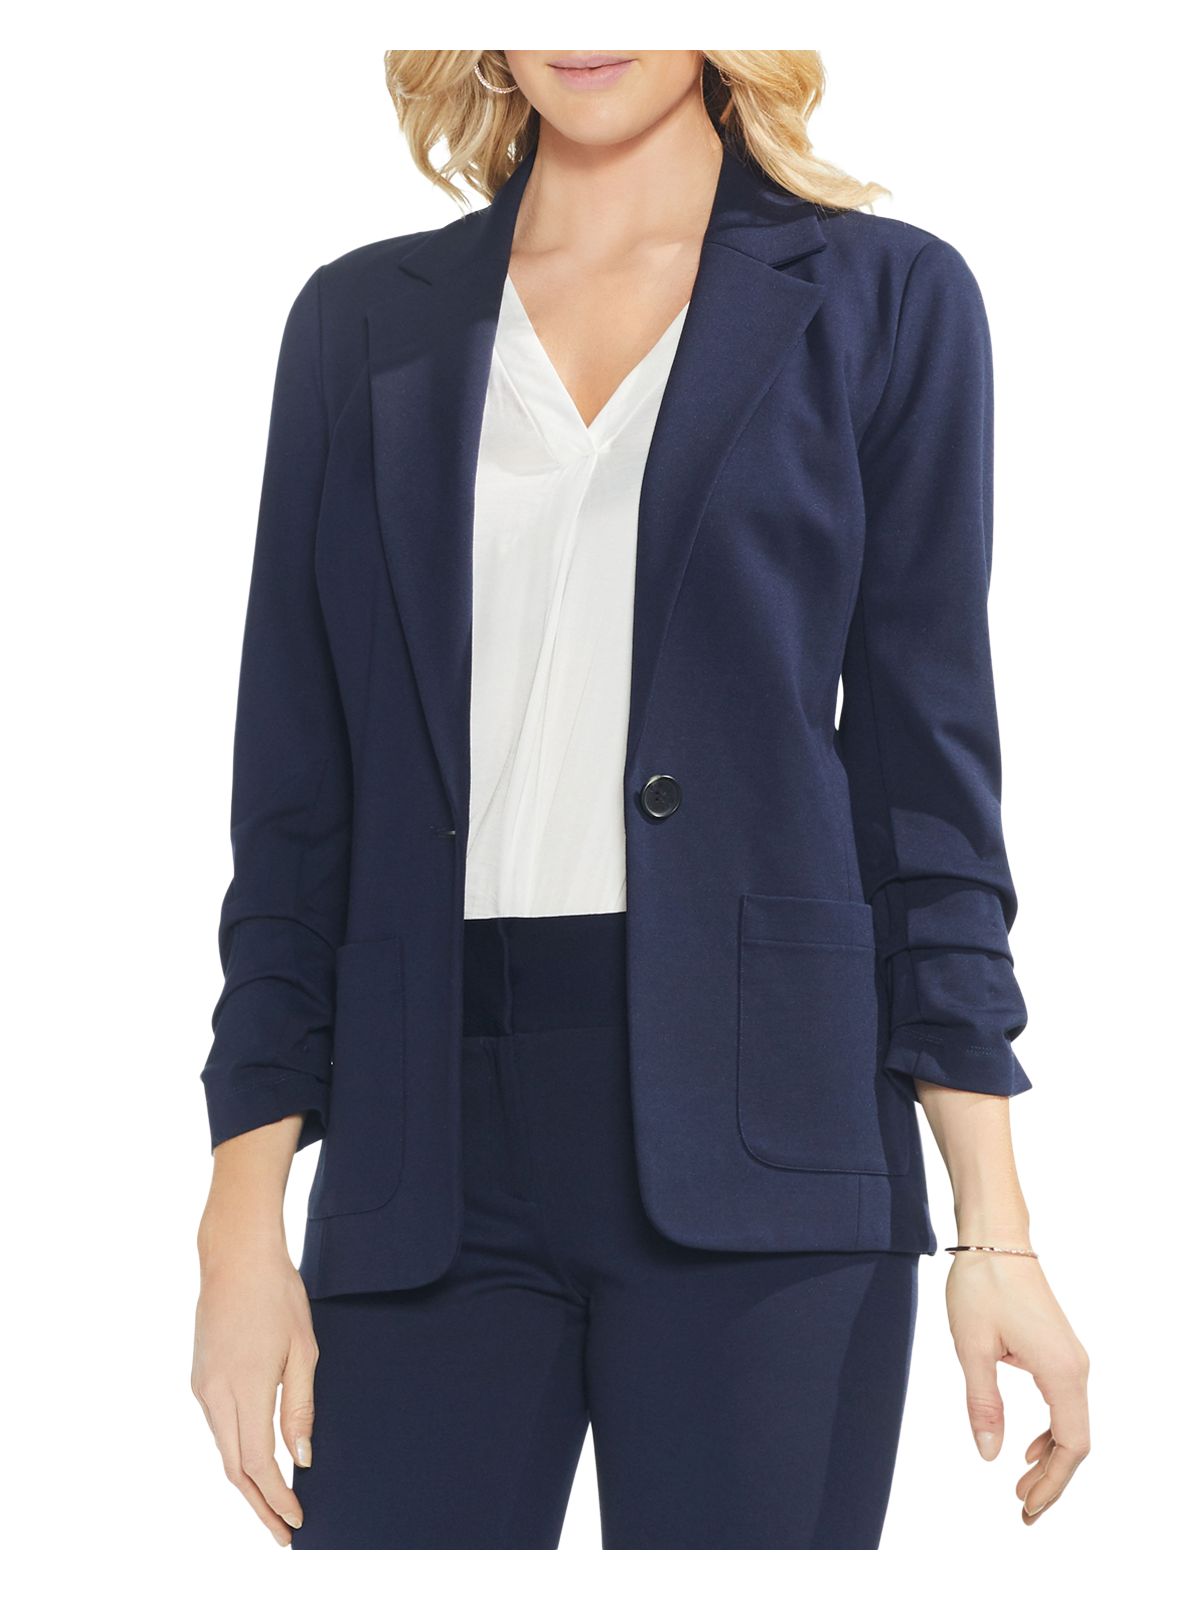 VINCE CAMUTO Womens Navy Pocketed Ruched 3/4 Sleeve Notched Collar Button Wear To Work Blazer Jacket XS